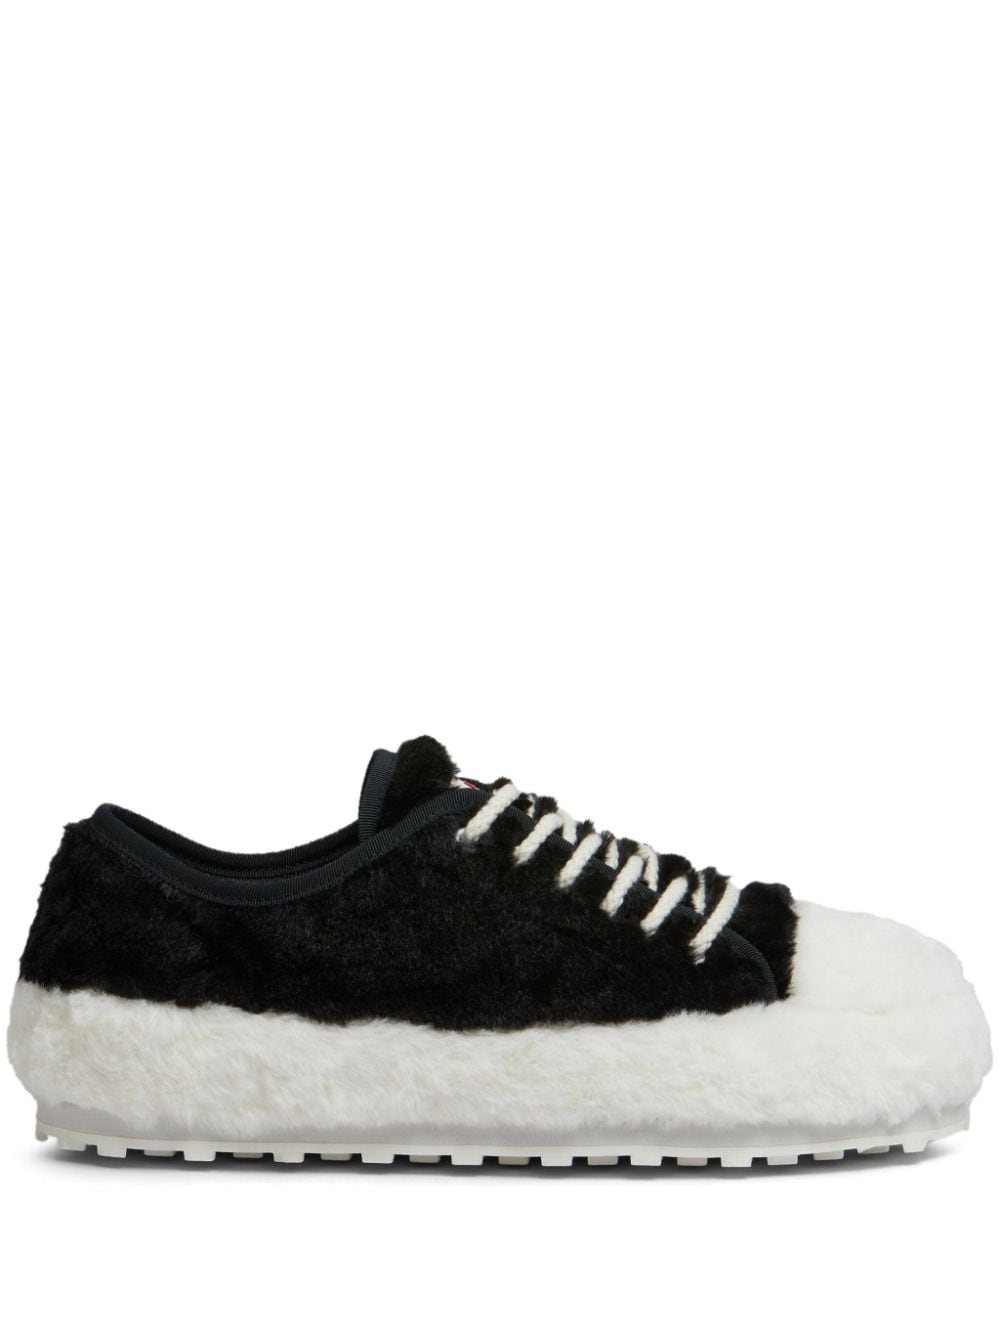 Marni Teddy Lace-up Sneakers In Black